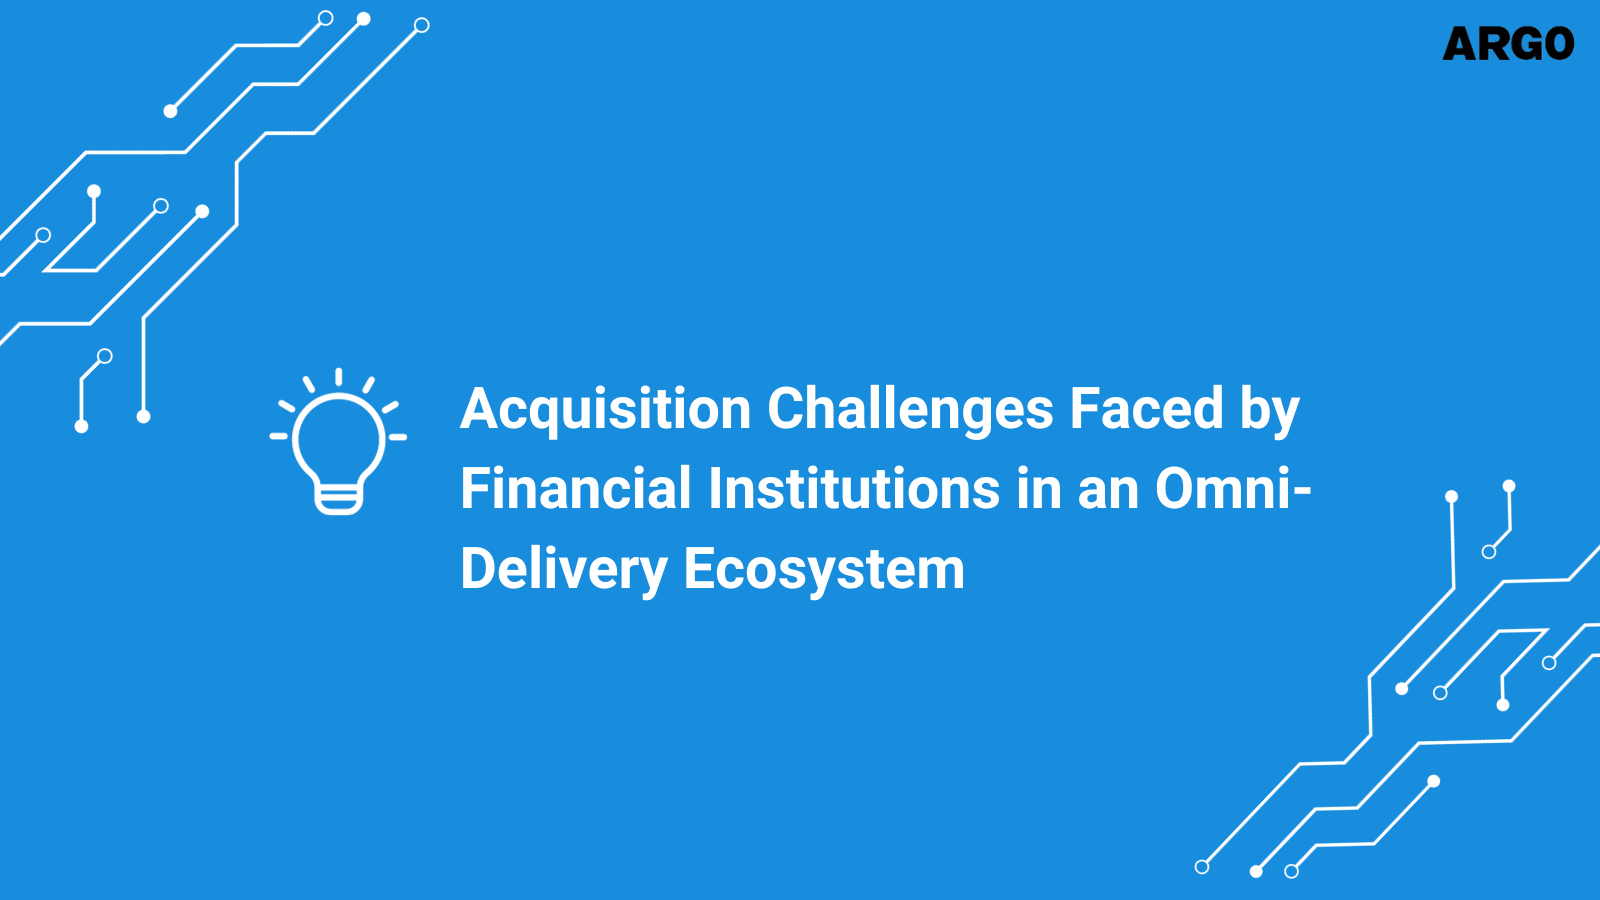 Acquisition Challenges Faced by Financial Institutions in an Omni-Delivery Ecosystem